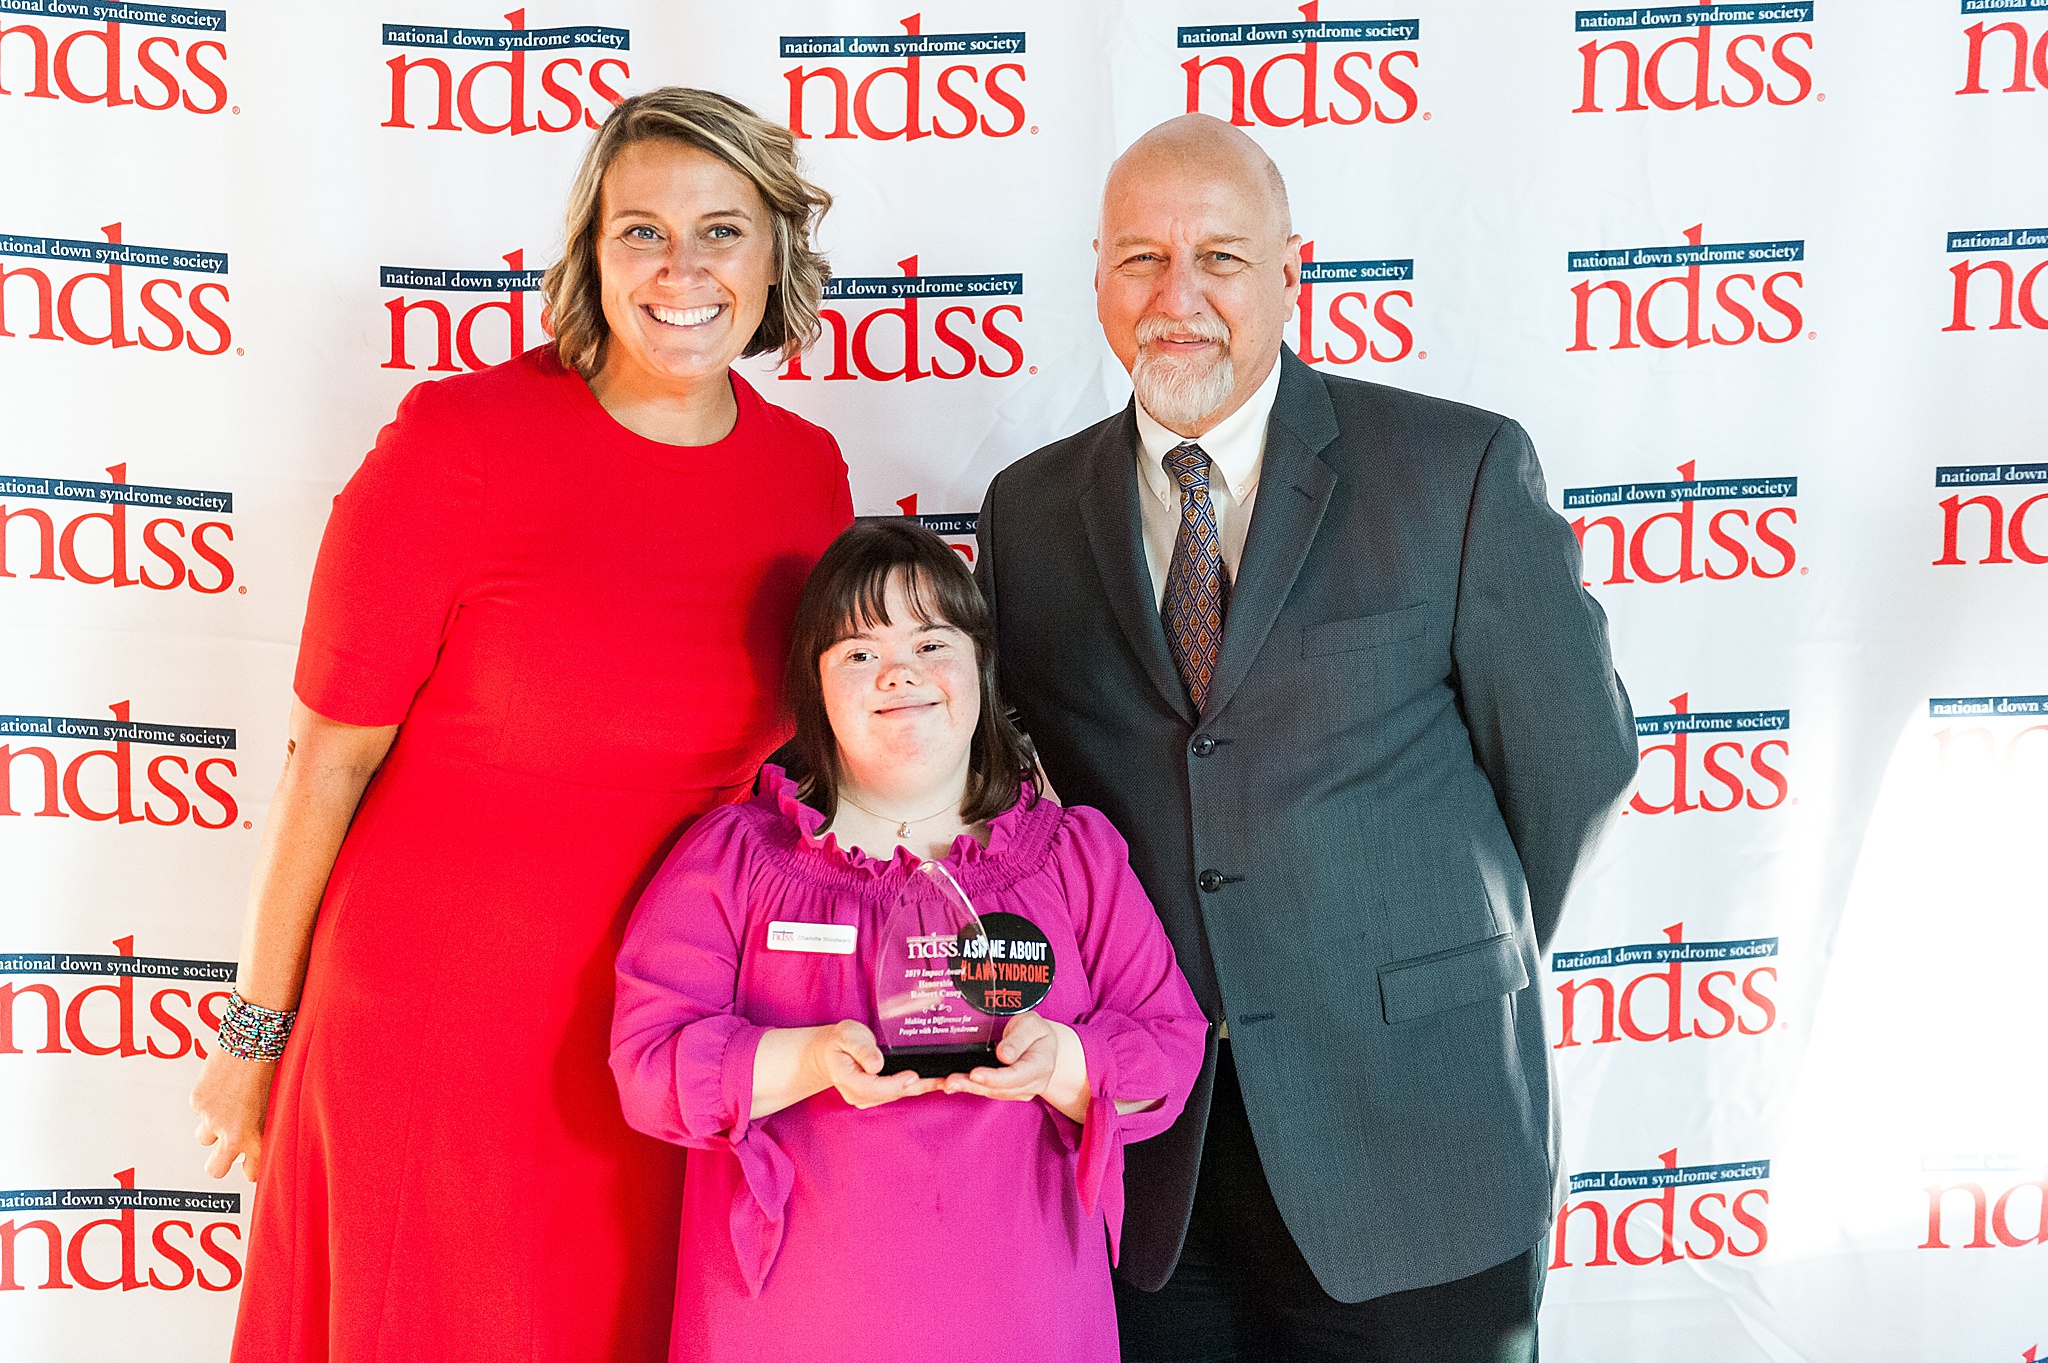 Wendy Zook Photography | National Down Syndrome Society, Down Syndrome awareness, Down Syndrome advocate, DS advocate, MD Down Syndrome advocate, Down Syndrome Photographer, DS photographer, Down Syndrome photography, NDSS, Caring with Congress 2019